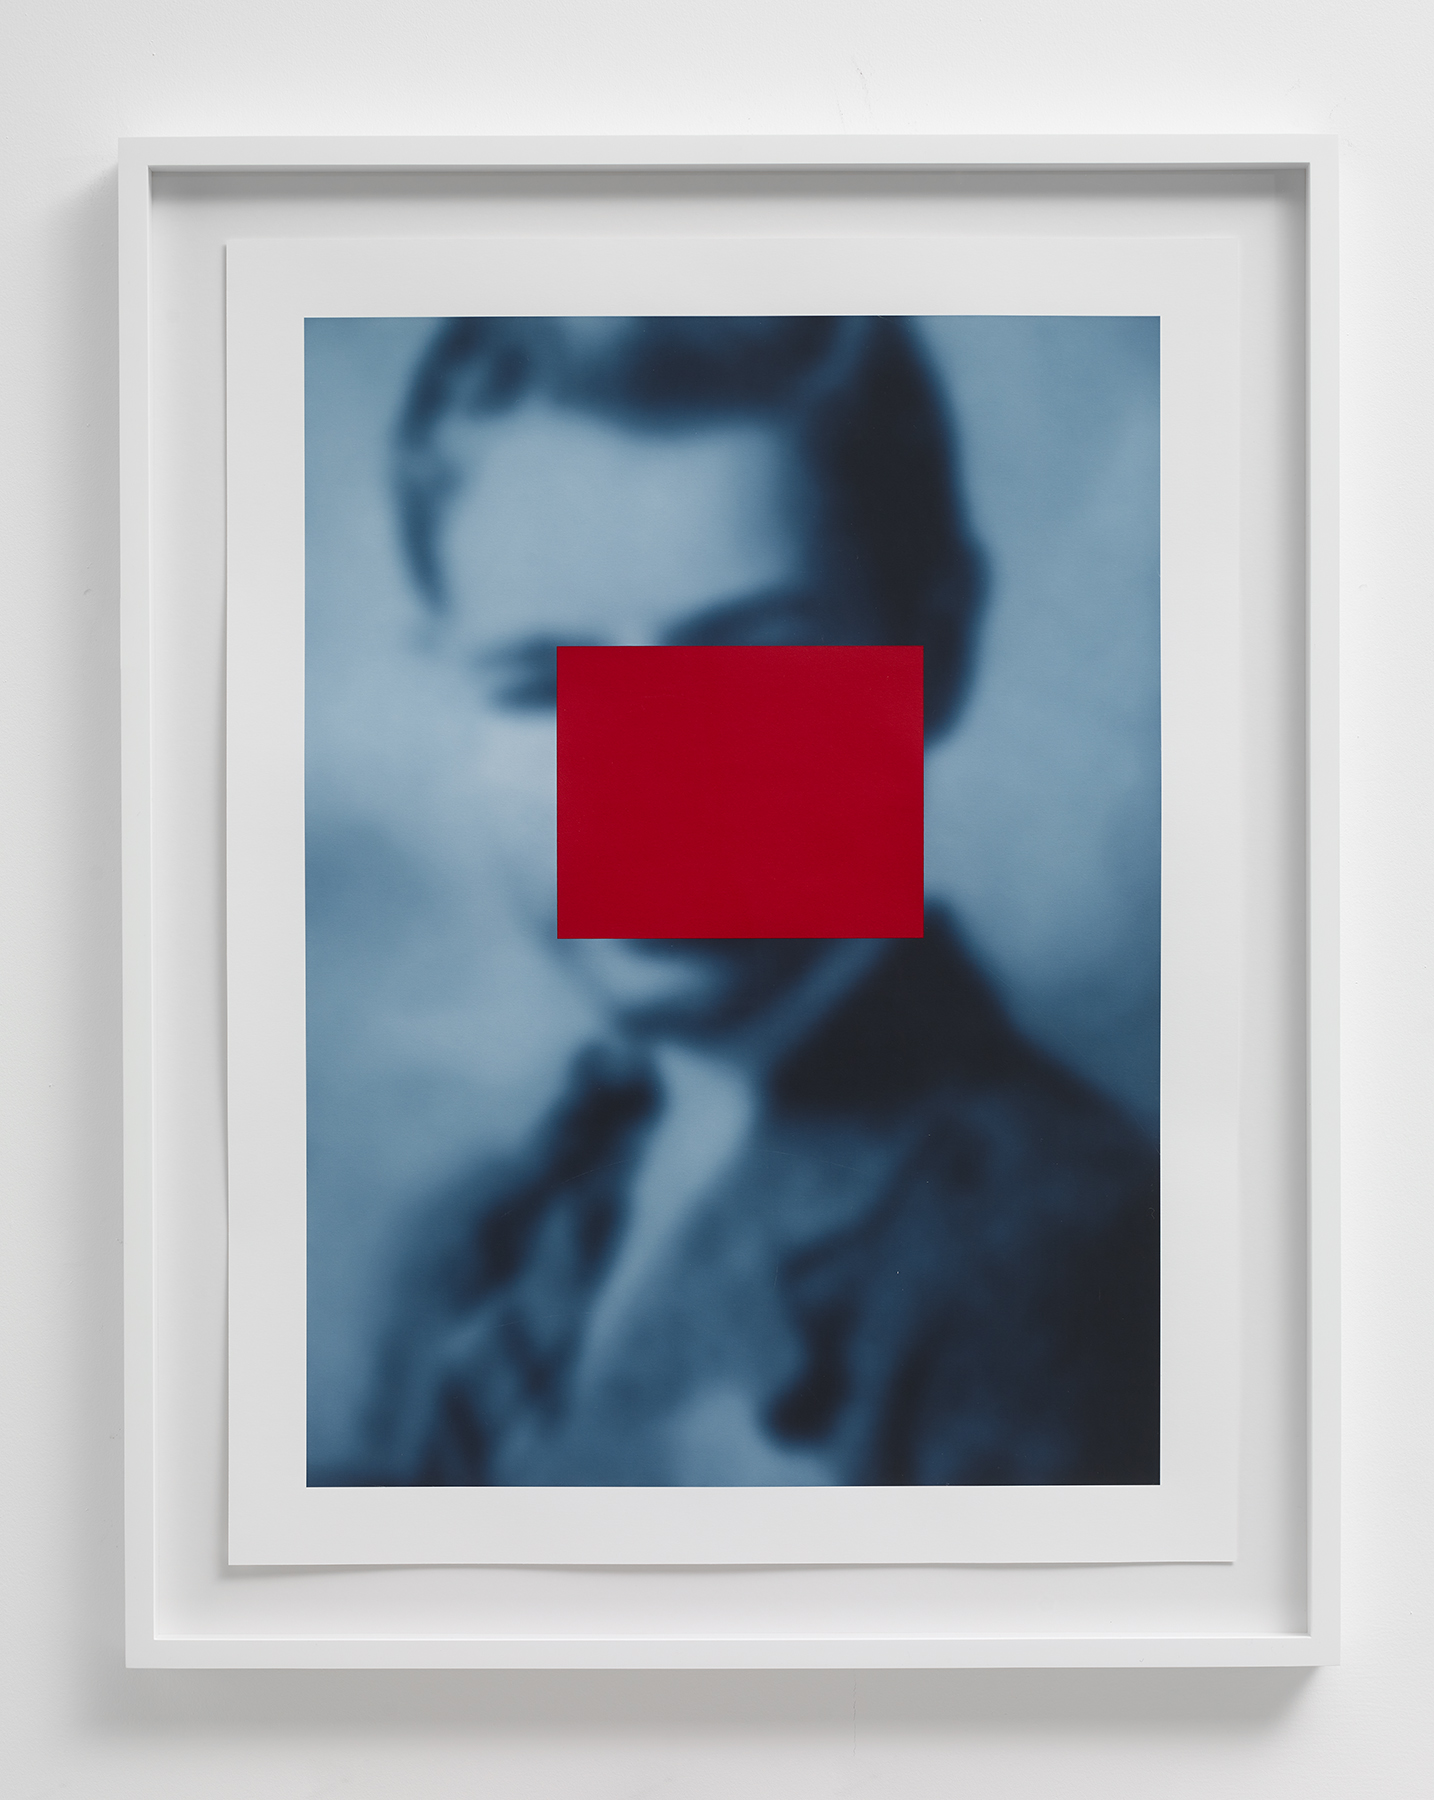 Image of Carrie Mae Weems' Blue Notes Warhol Who's Who or Pair of Aces, 2014